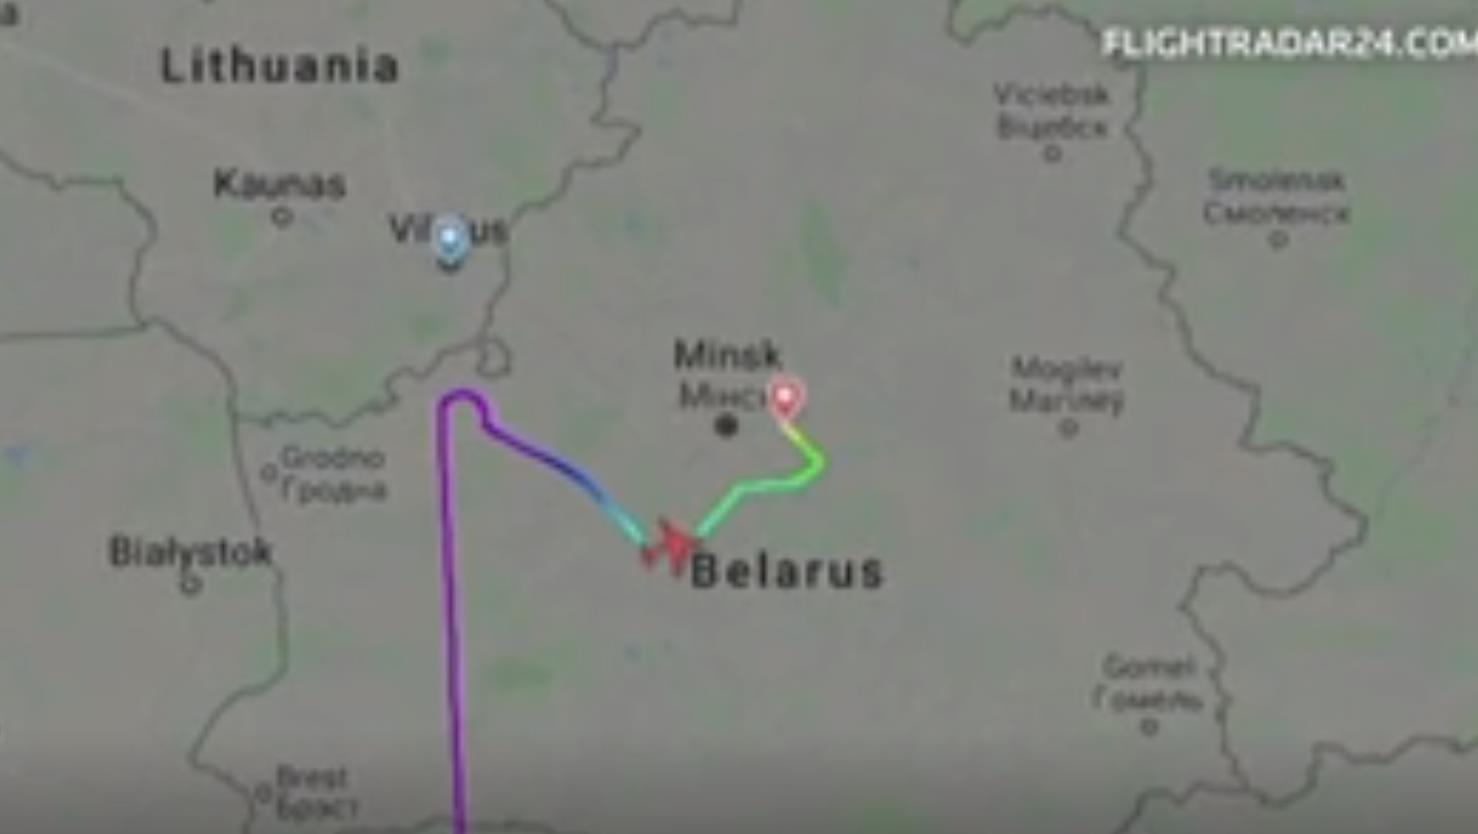 Reuters: Belarus forces airliner to land and arrests opponent, sparking U.S. and European outrage